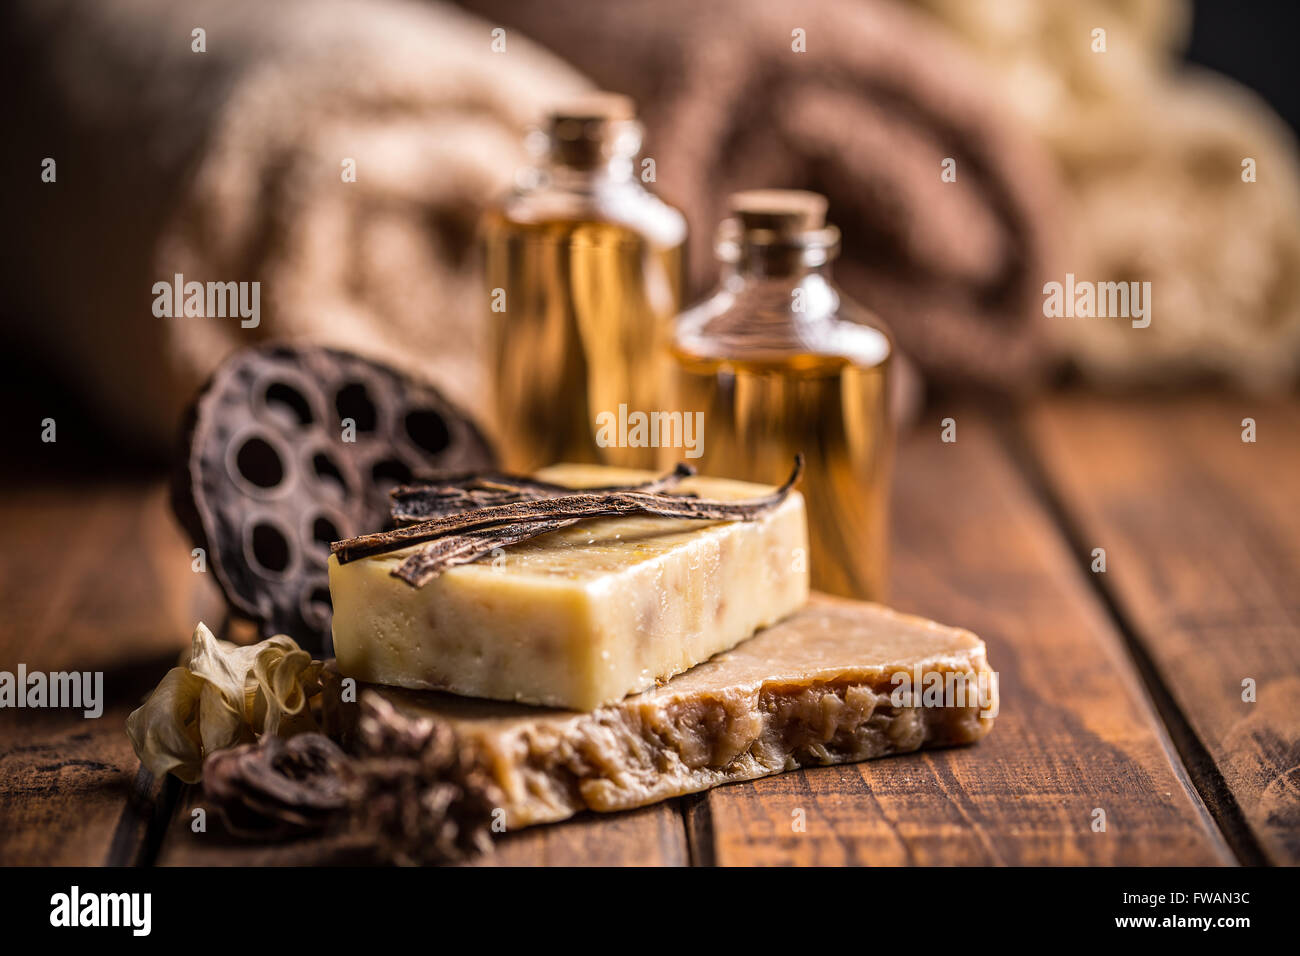 Bars of handmade soap with vanilla essential oil Stock Photo